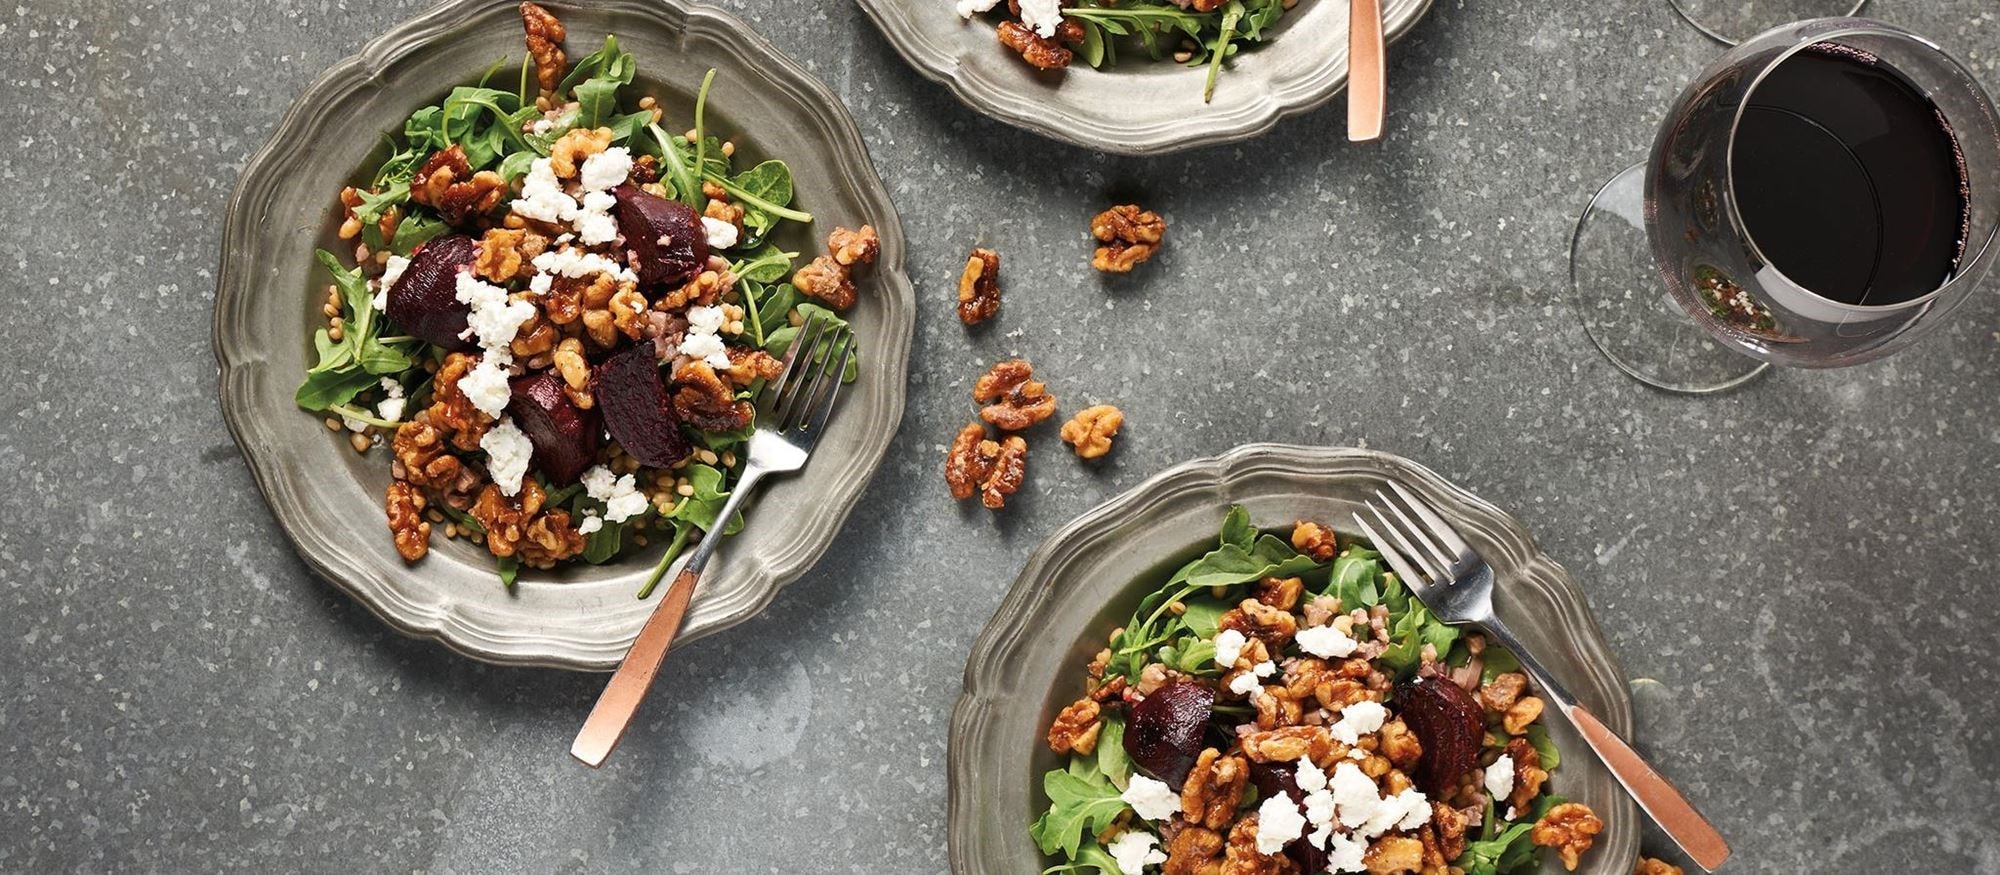 Roasted Beet and Wheat Berry Salad with Walnut Vinaigrette